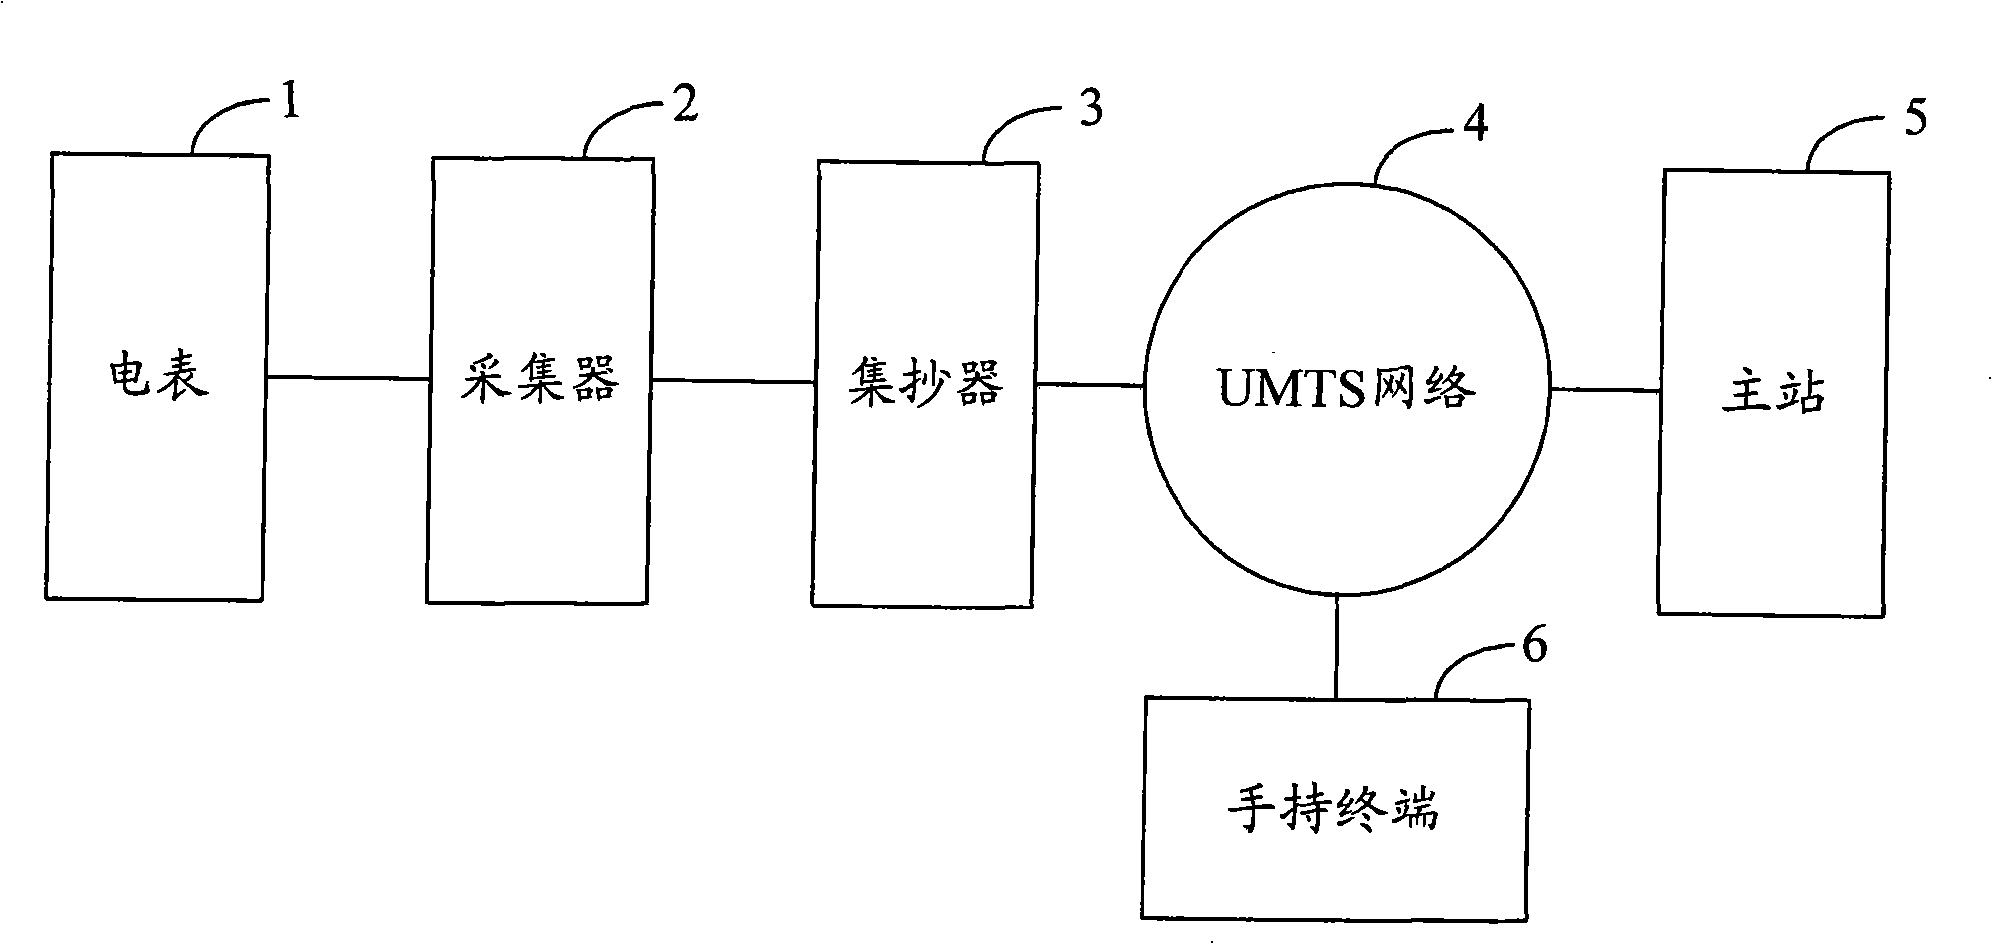 Method, system and apparatus for wireless remote meter-reading